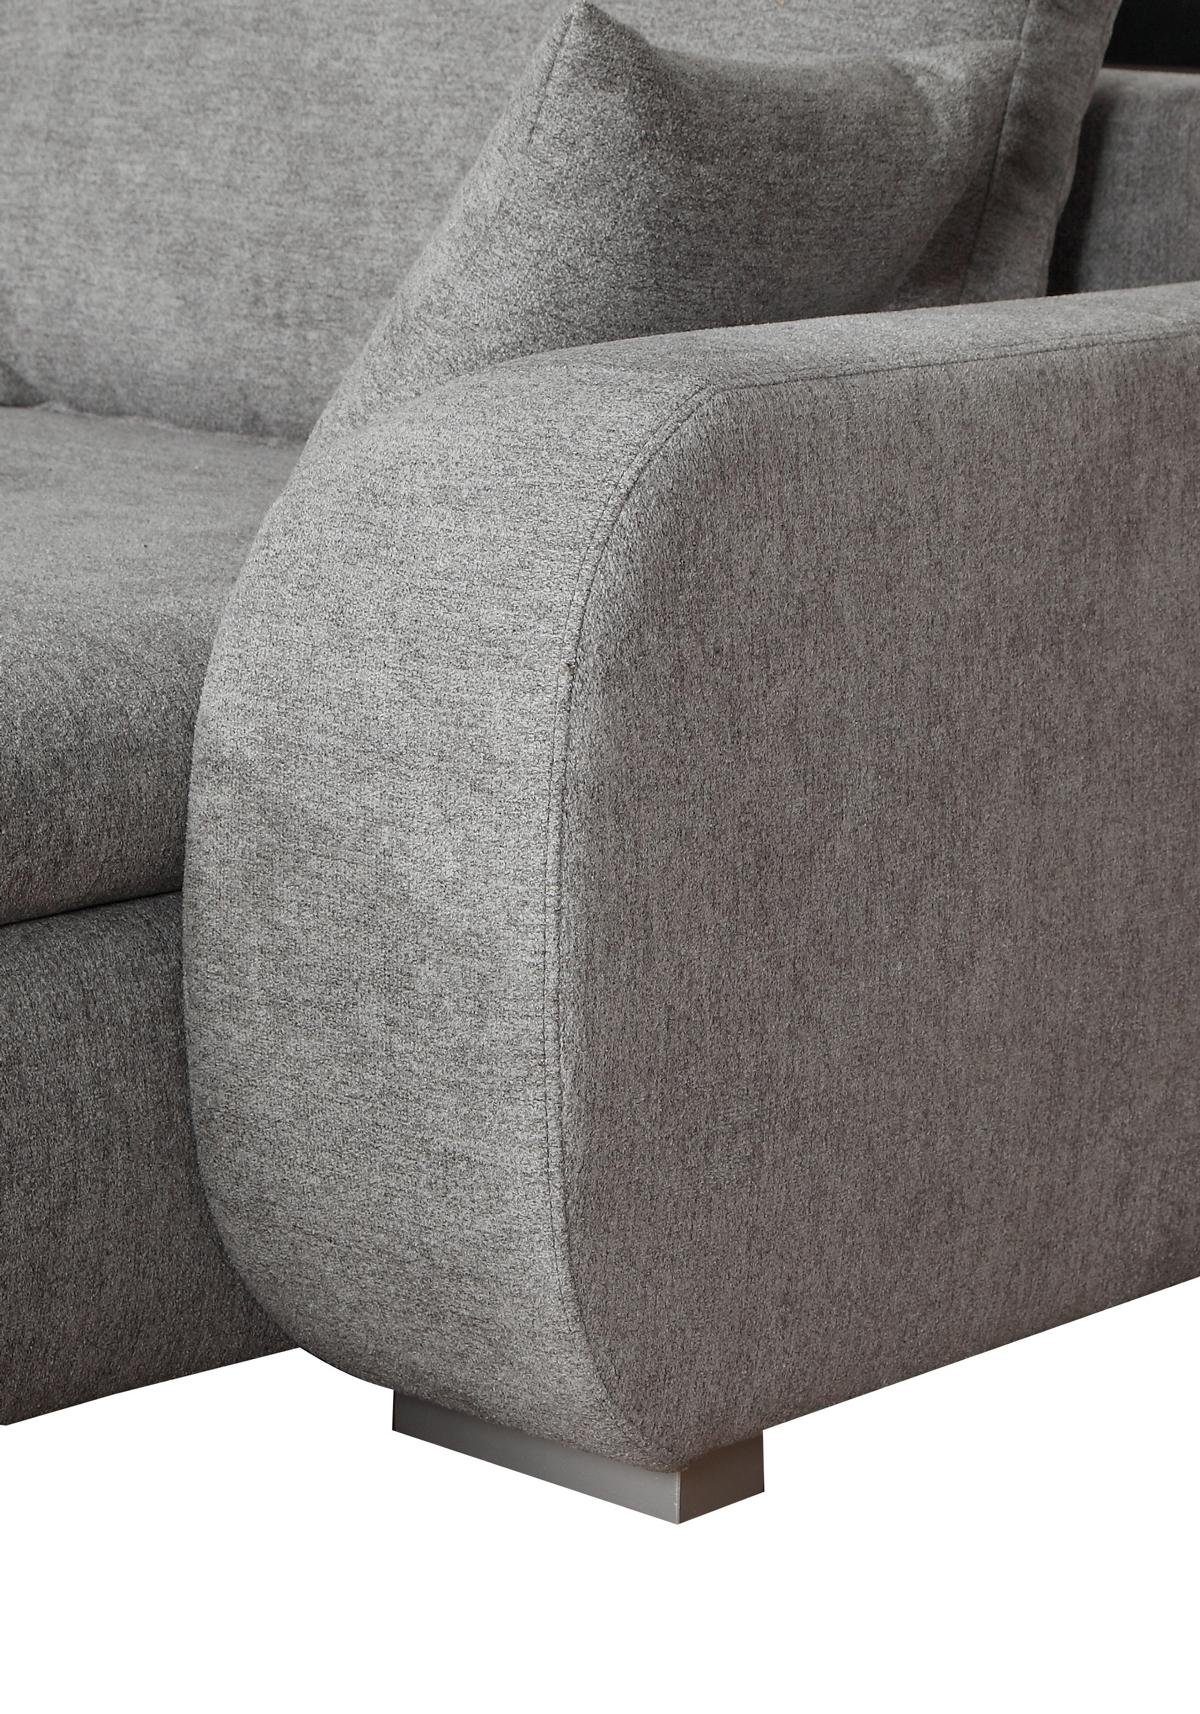 Polster Form Stoffsofa Couch Sofa Wohnlandschaft, JVmoebel Europe L Sofa in Made